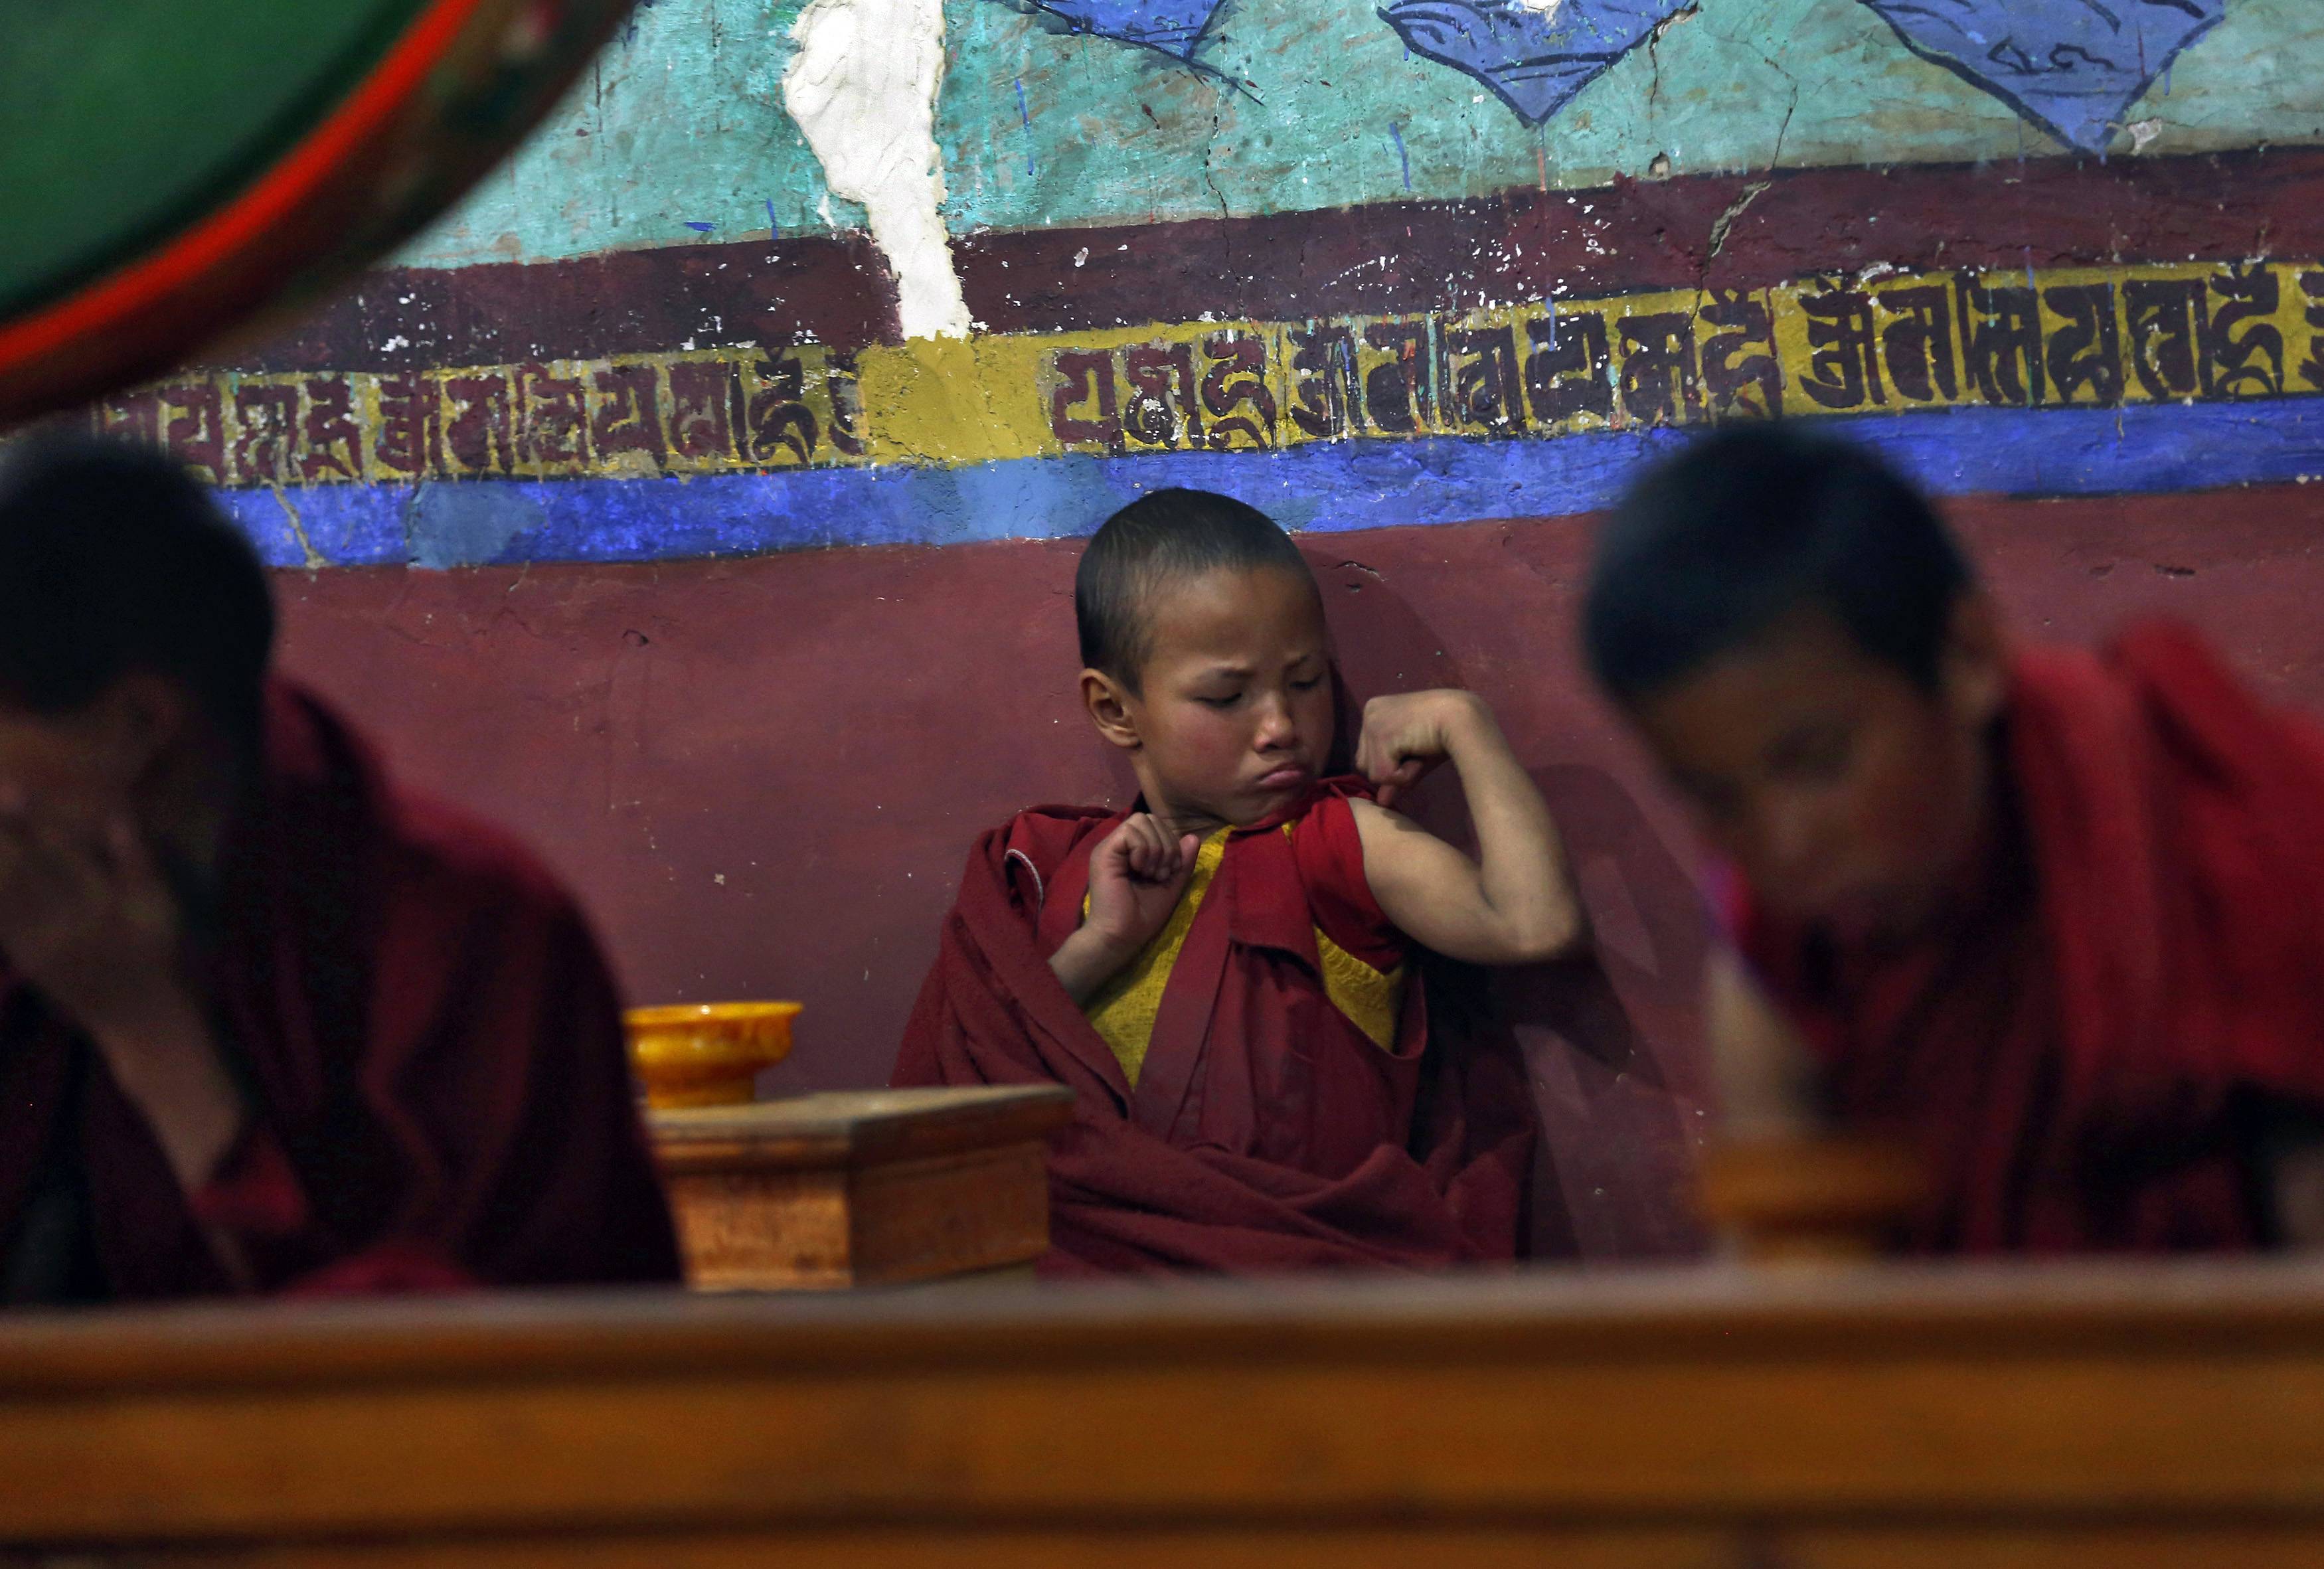 A young Buddhist monk during morning prayers at the Thikse Monastery in Ladakh, India